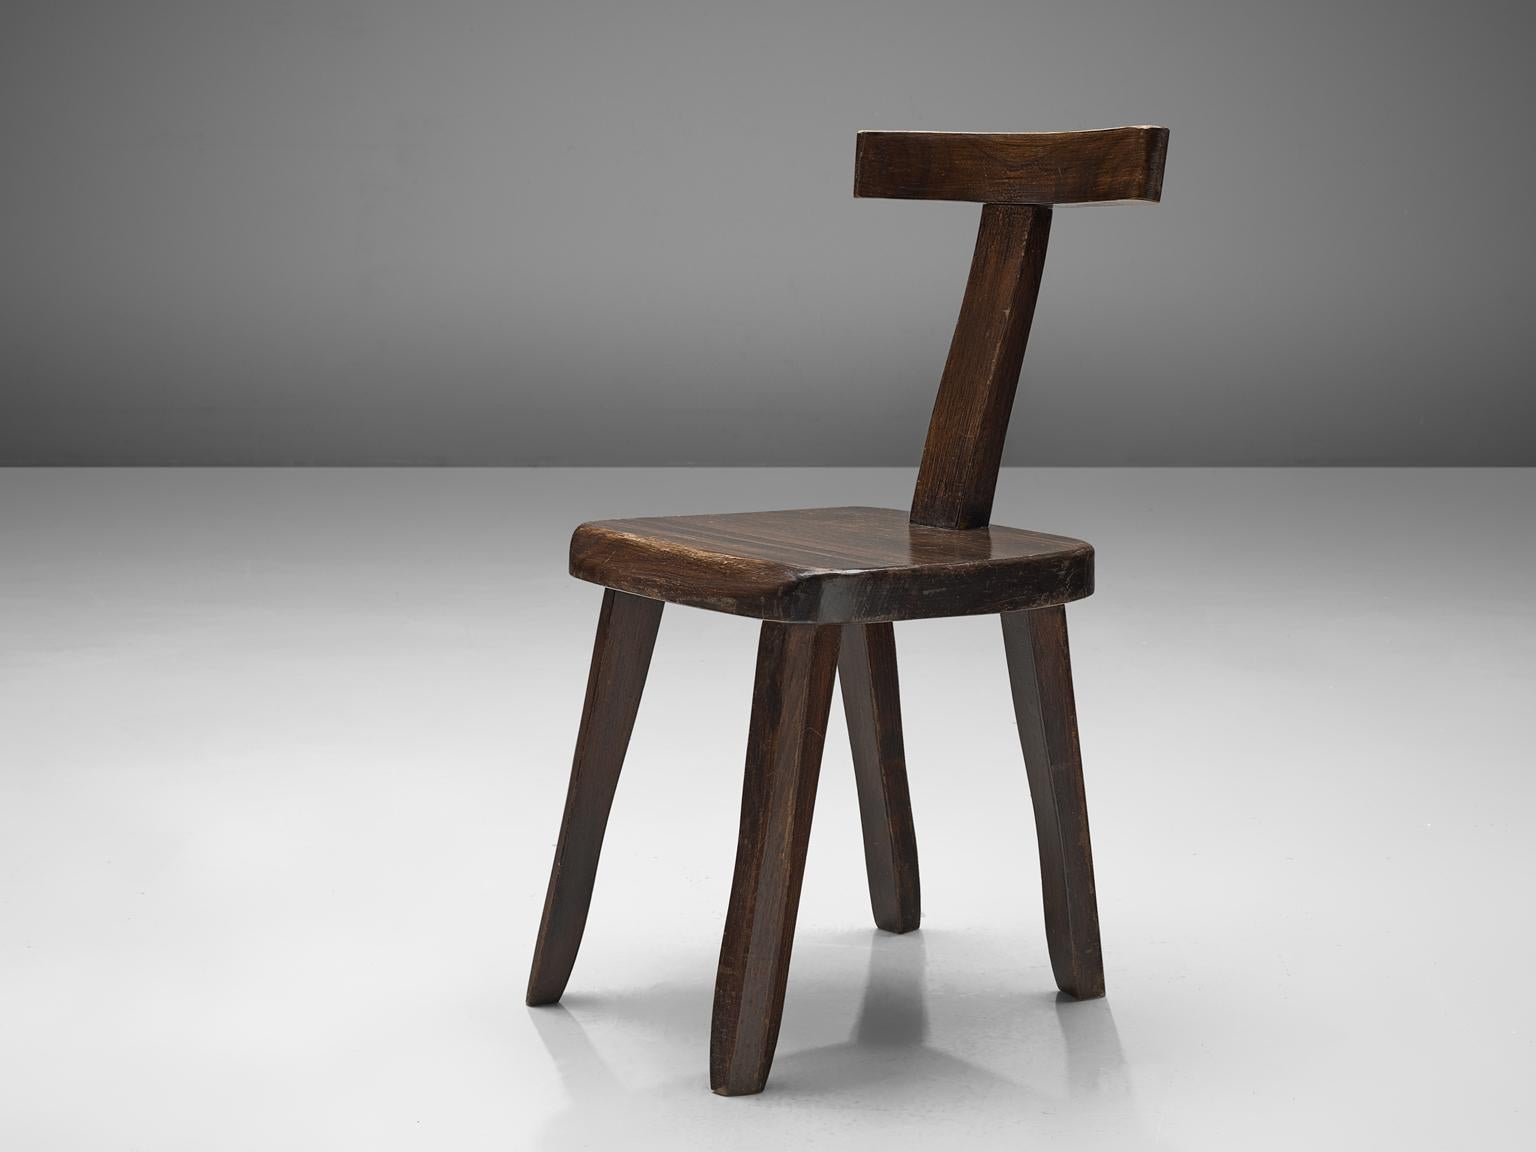 Olavi Hanninen for Mikko Nupponen, side chair, stained elm wood and brass, Finland, 1950.

Robust sculptural side chairs designed by Olavi Hanninen and manufactured by Mikko Nupponen. These chairs are made of stained elm wood and sculpturally